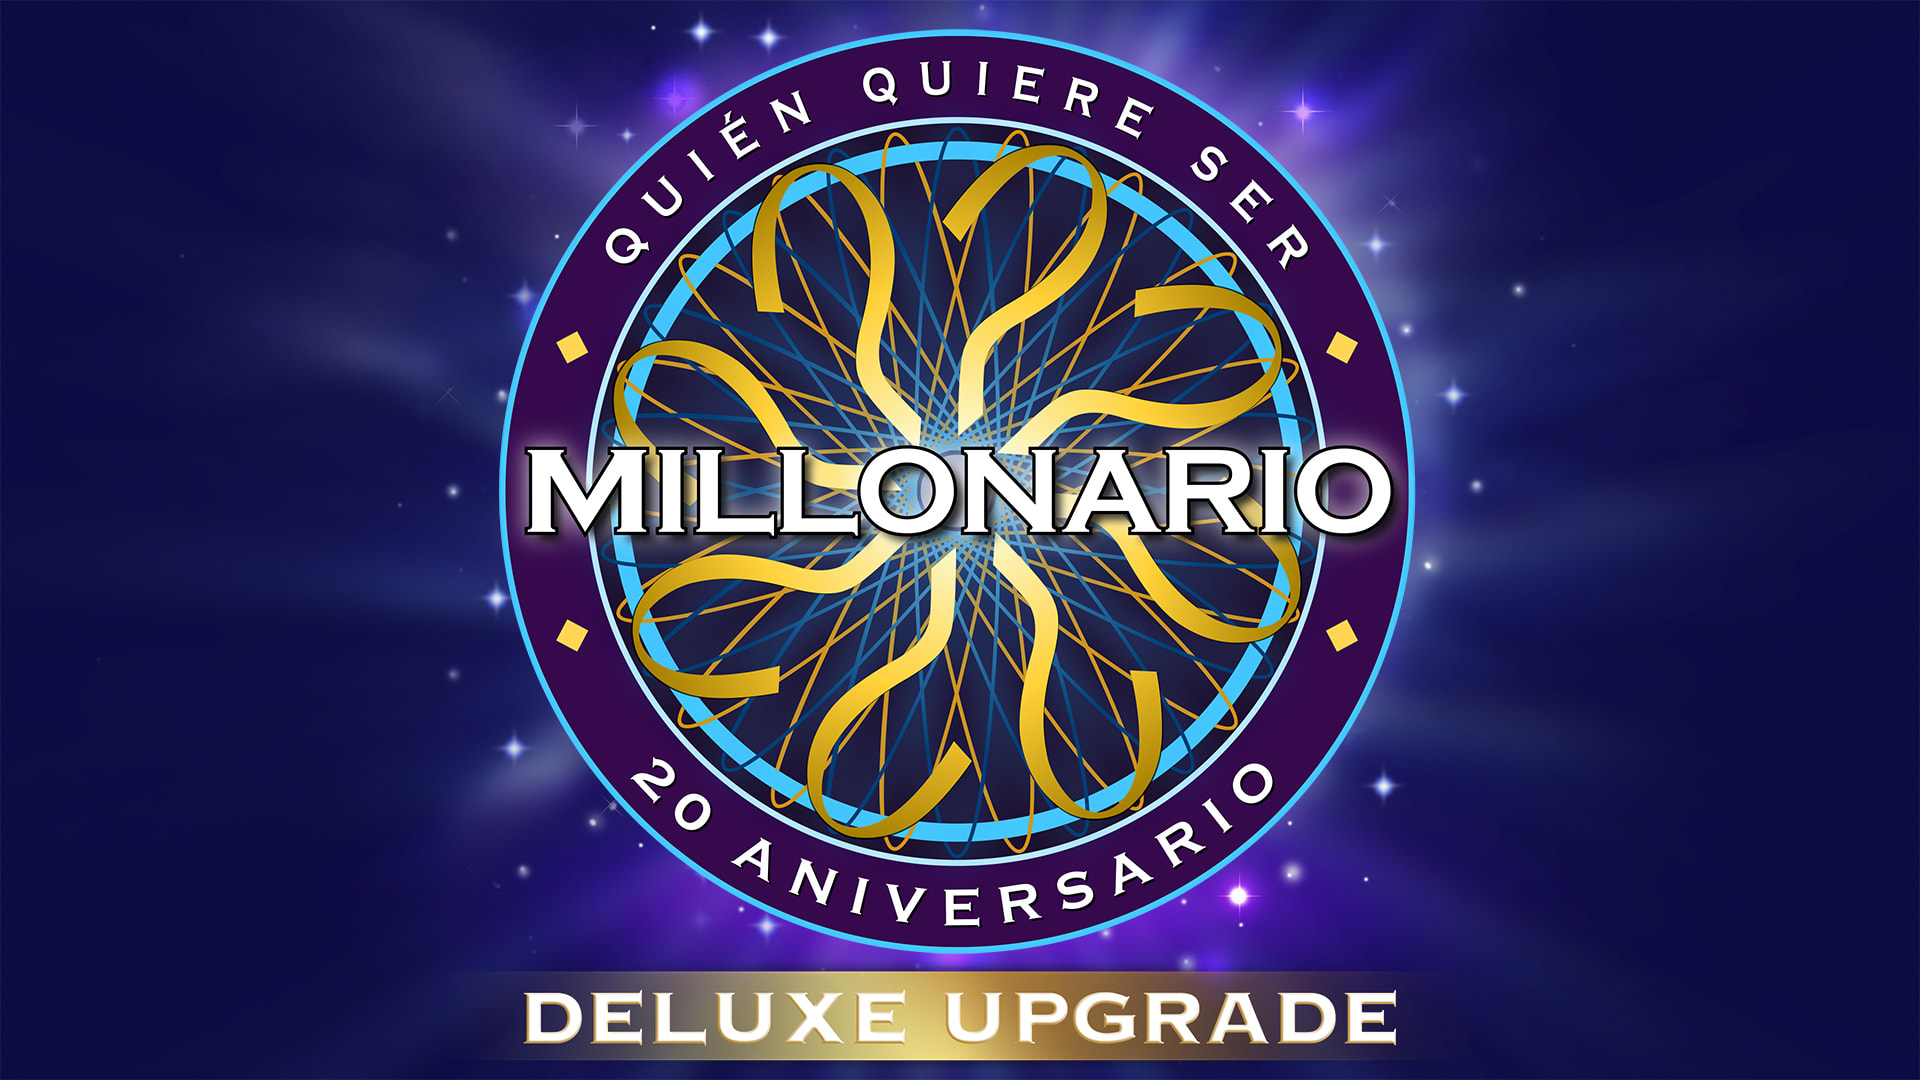 WHO WANTS TO BE A MILLIONAIRE? – DELUXE UPGRADE